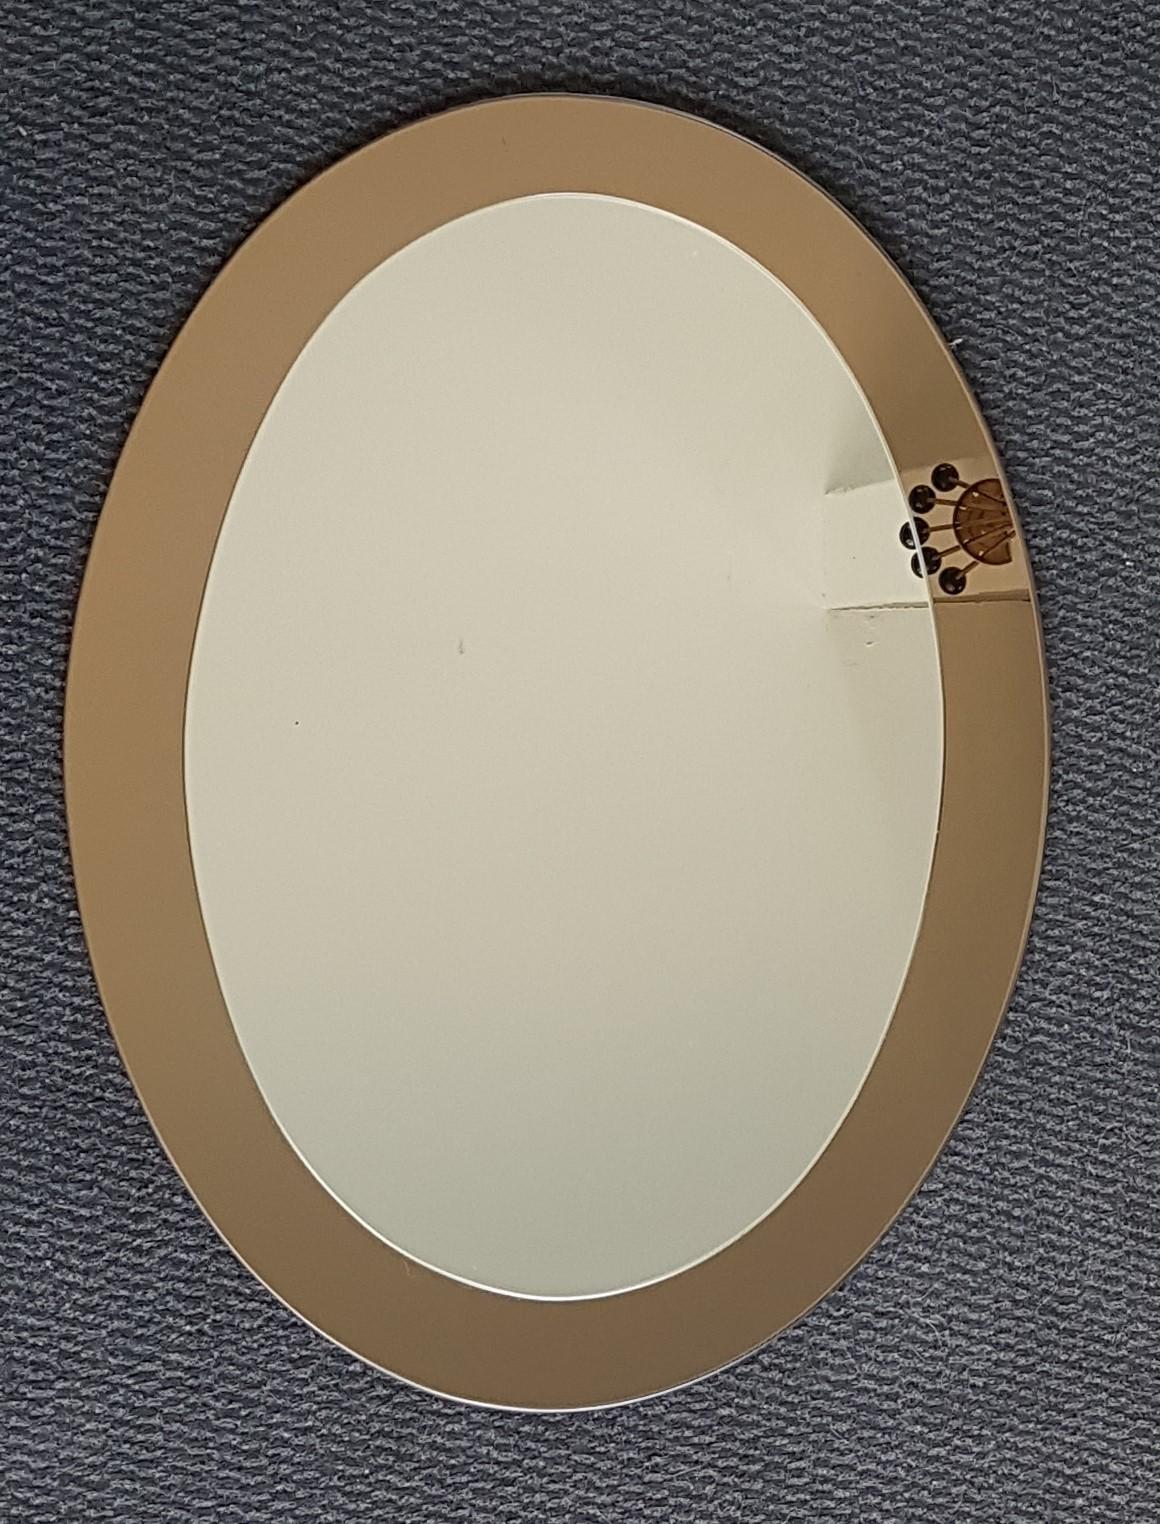 Midcentury mirror in the style of Fontana Arte, Italy, 1960. Bronze colored Glass Rim.

Mounting system for both directions.